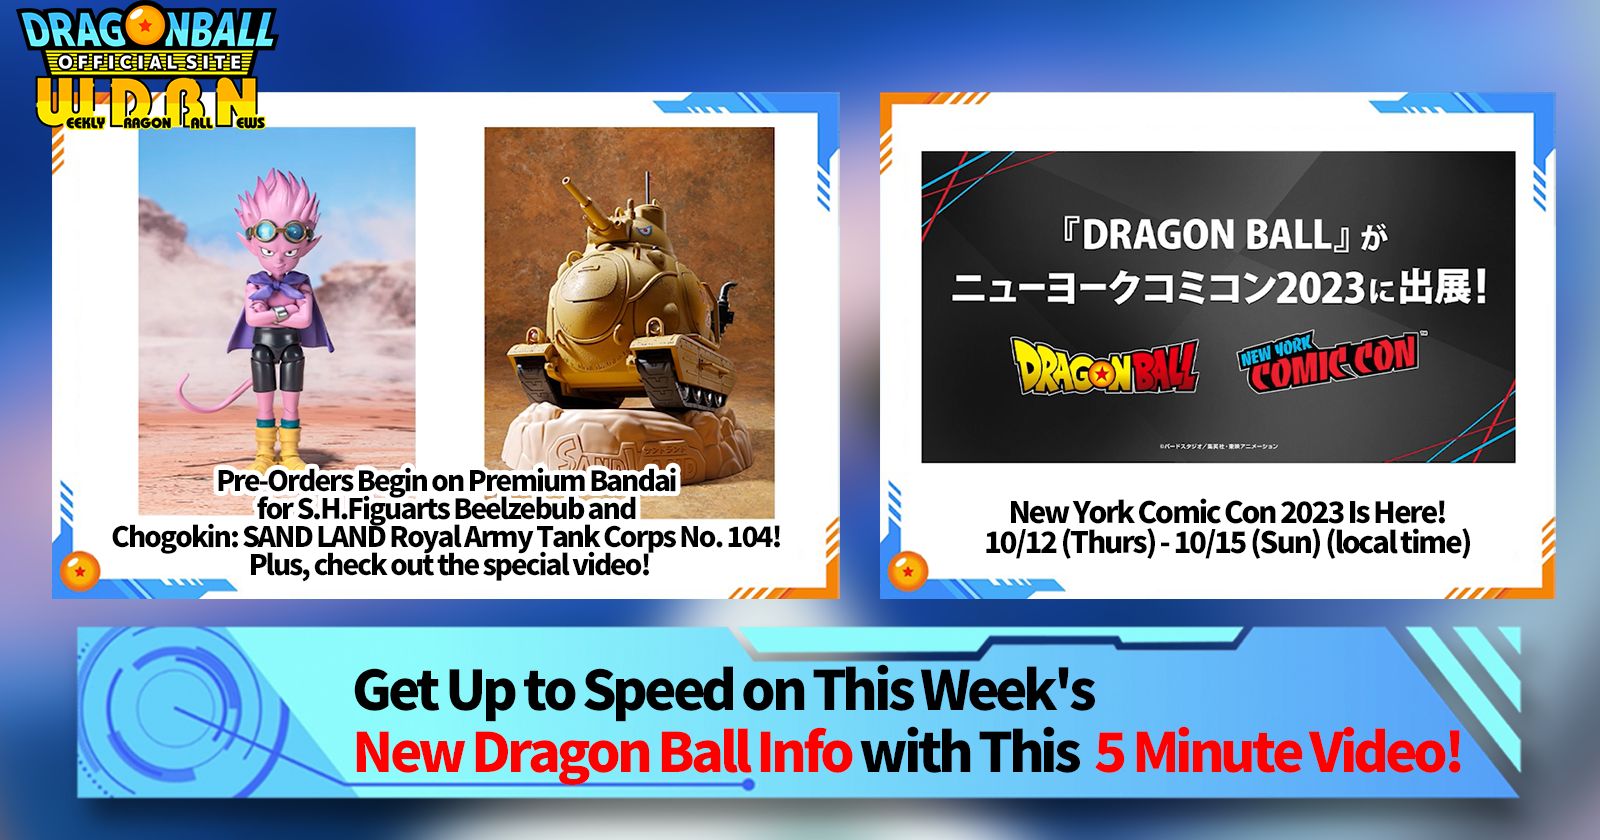 [October 9th] Weekly Dragon Ball News Broadcast!